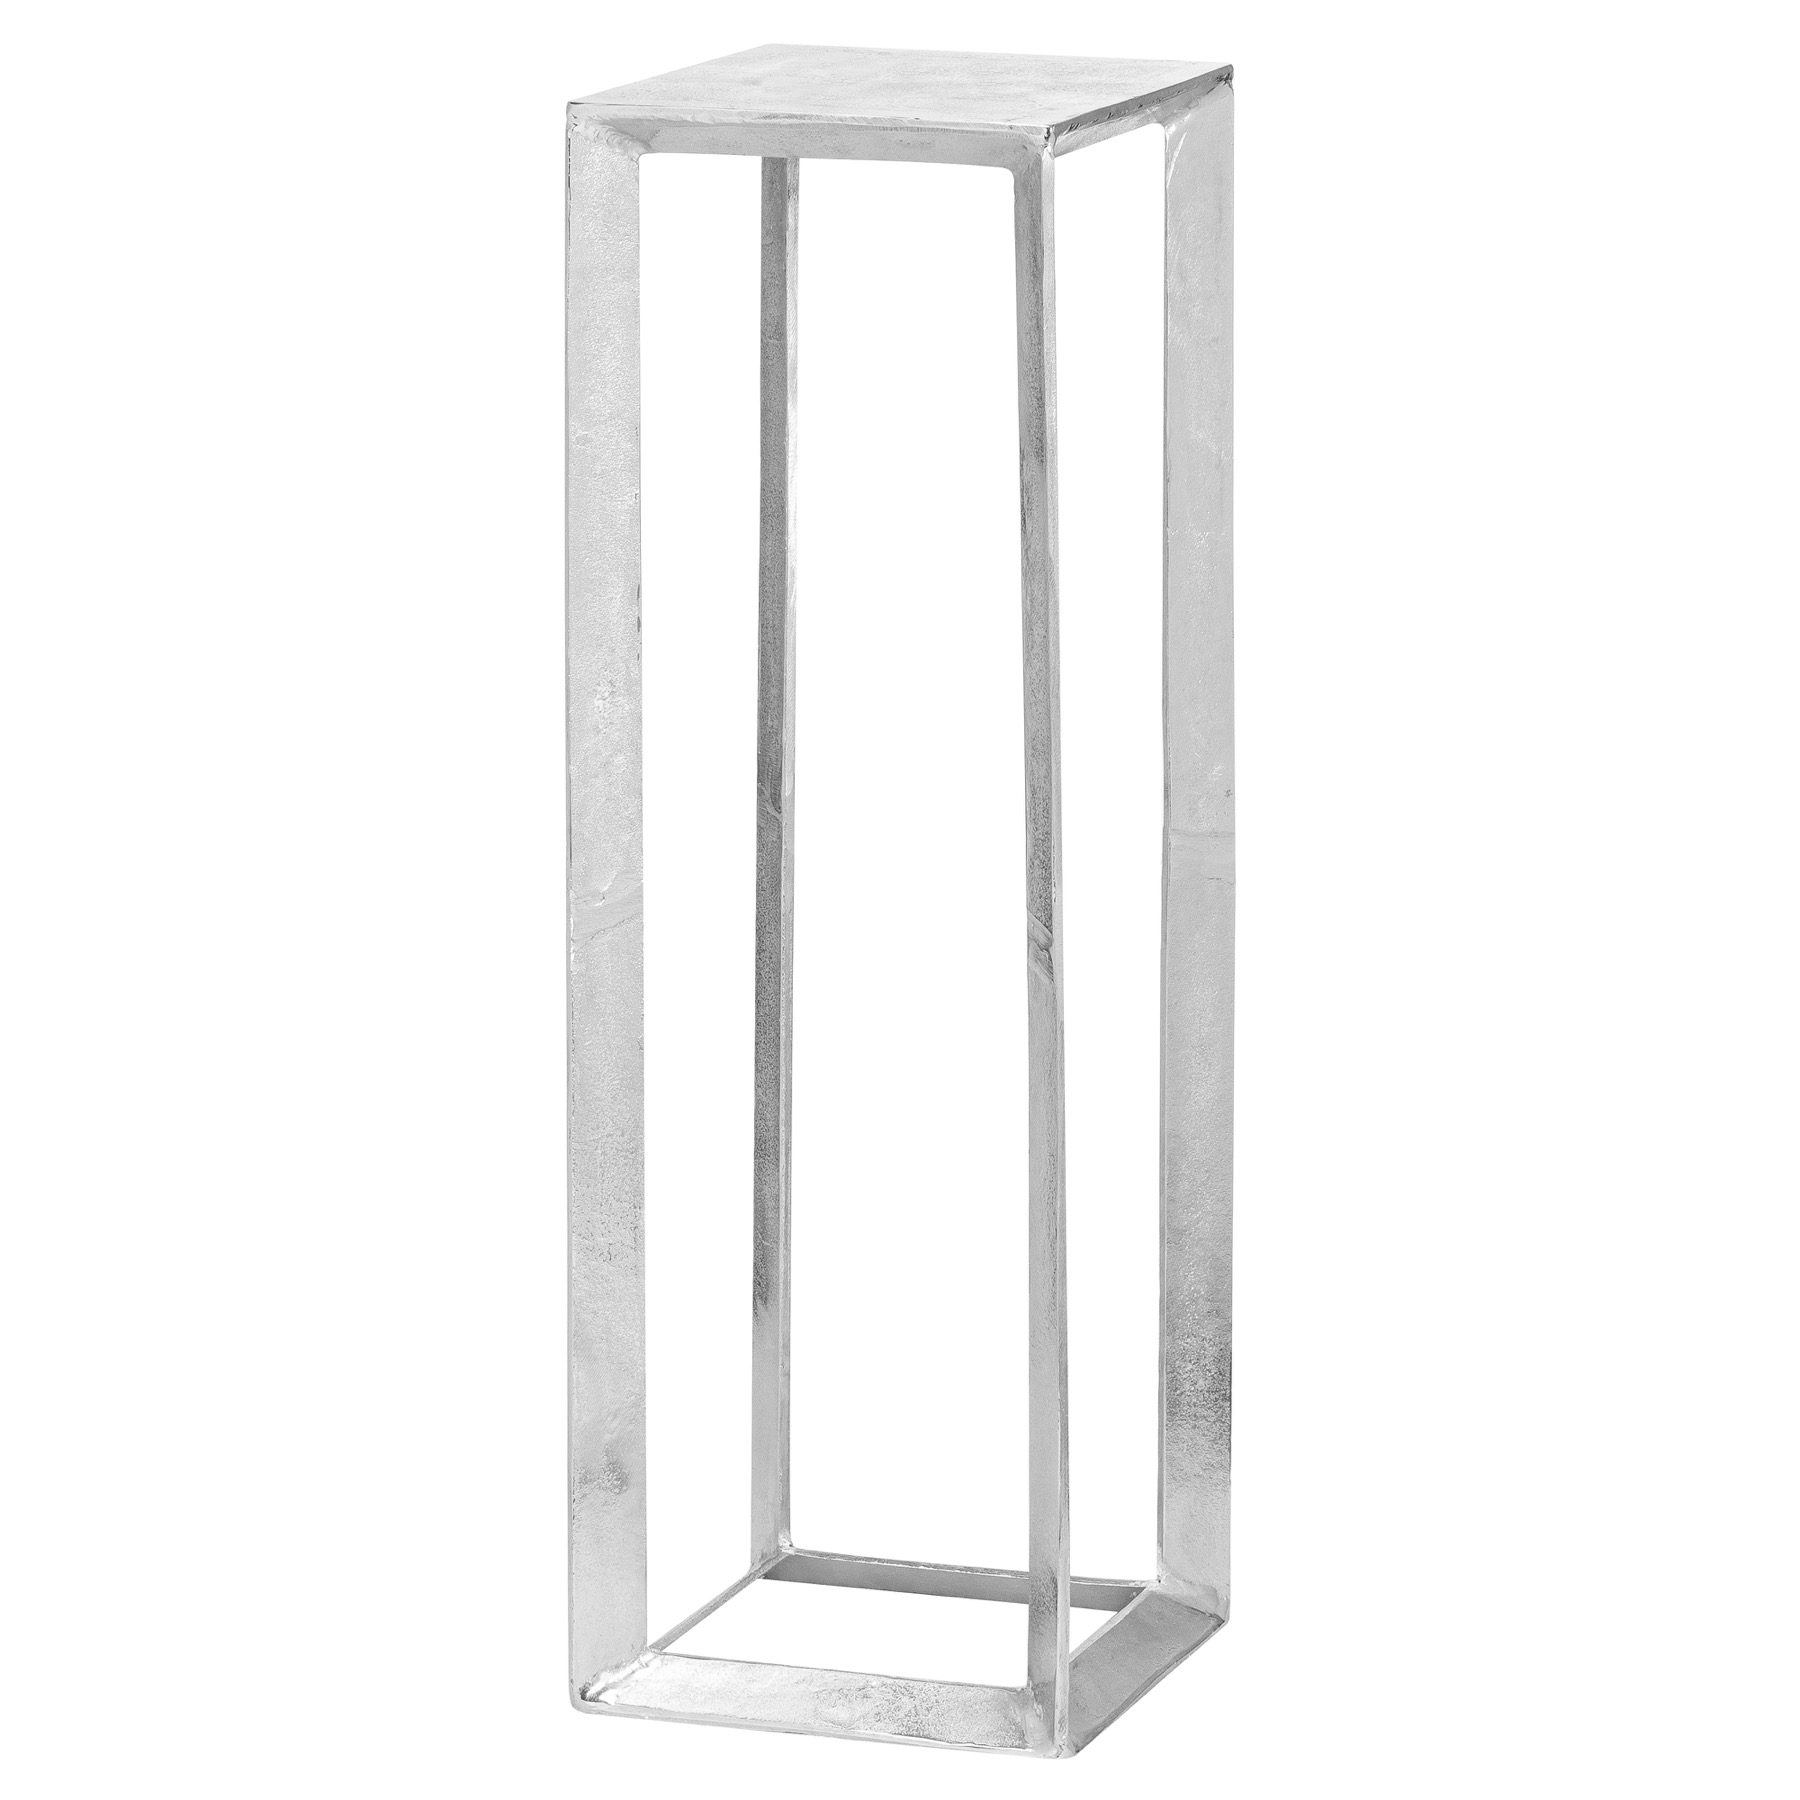 Farrah Collection Large Silver Plant Stand - Image 1